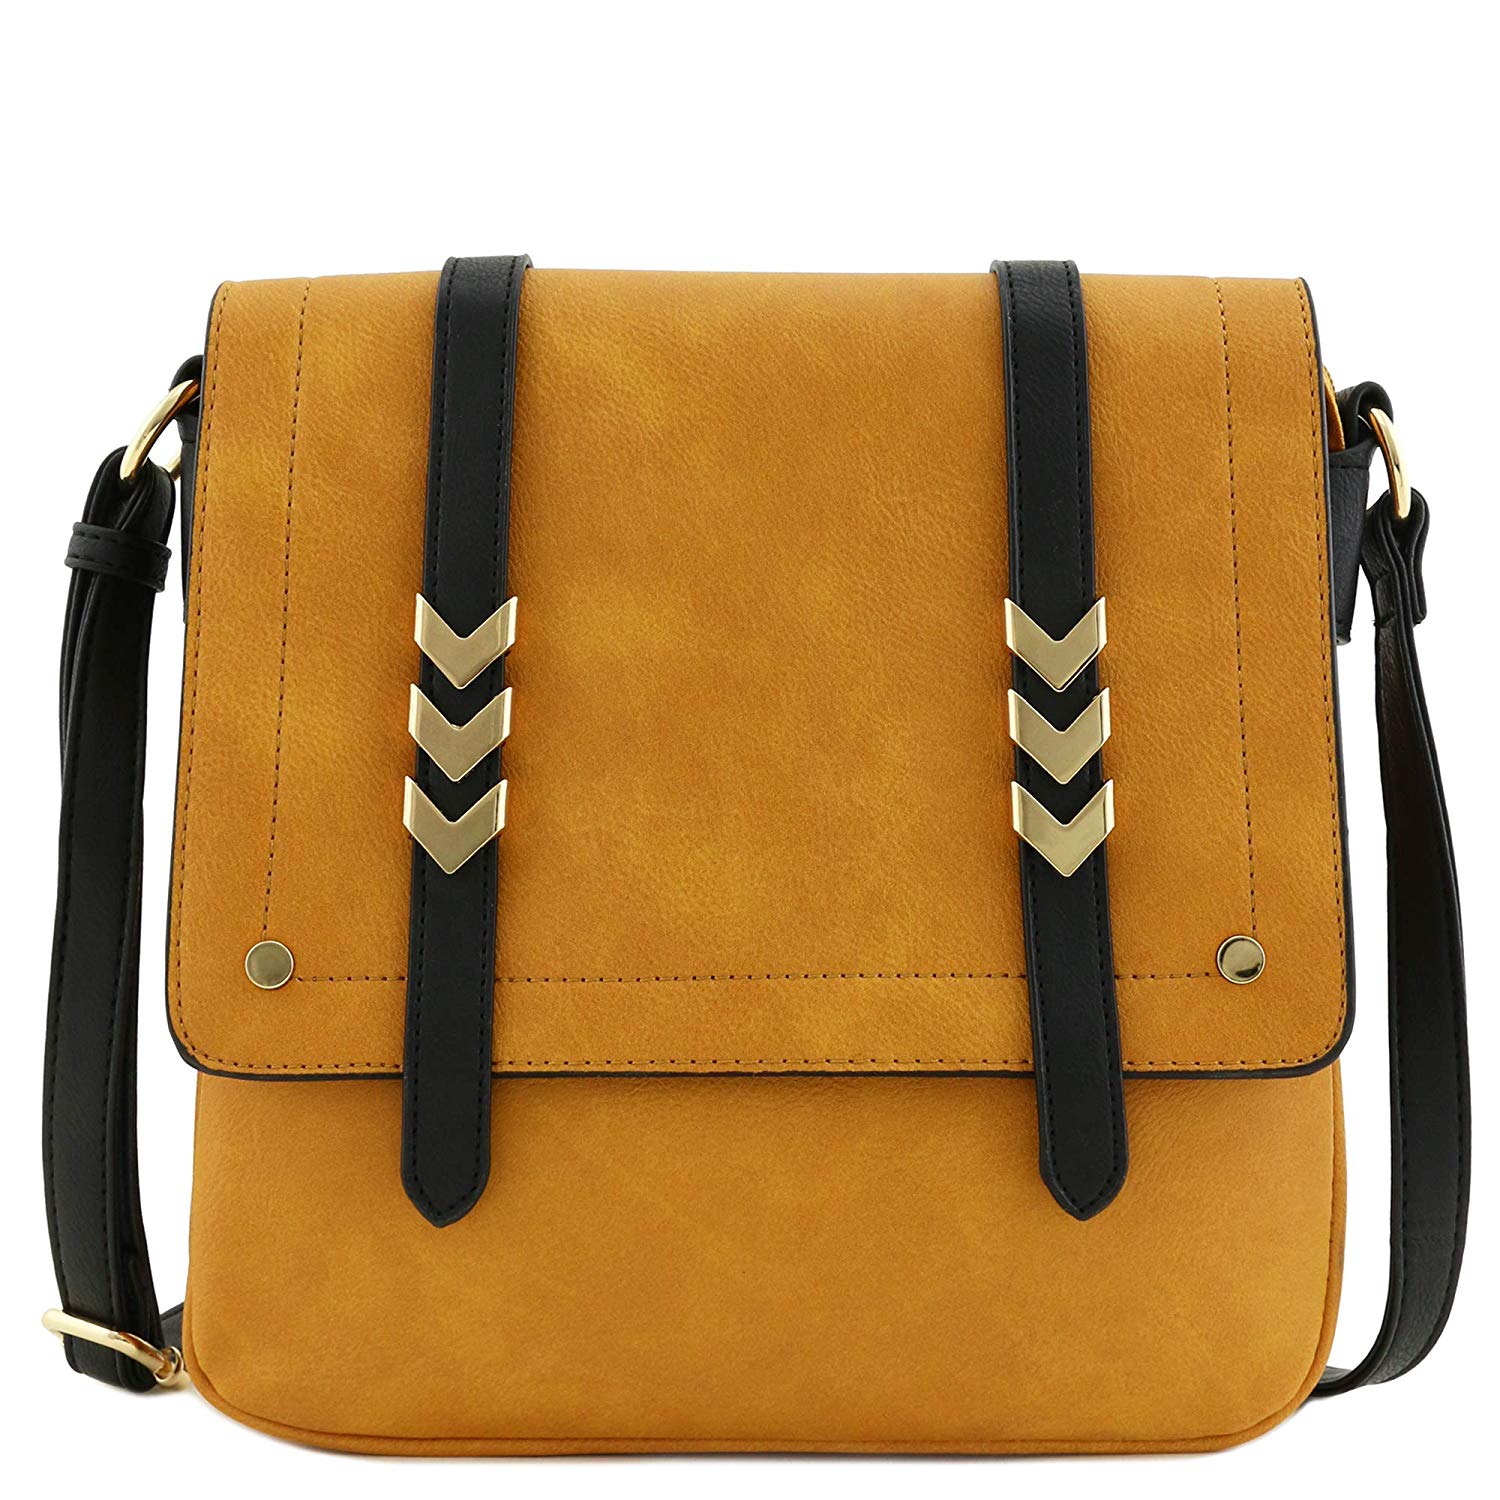 Review of Double Compartment Large Flapover Crossbody Bag by Alyssa